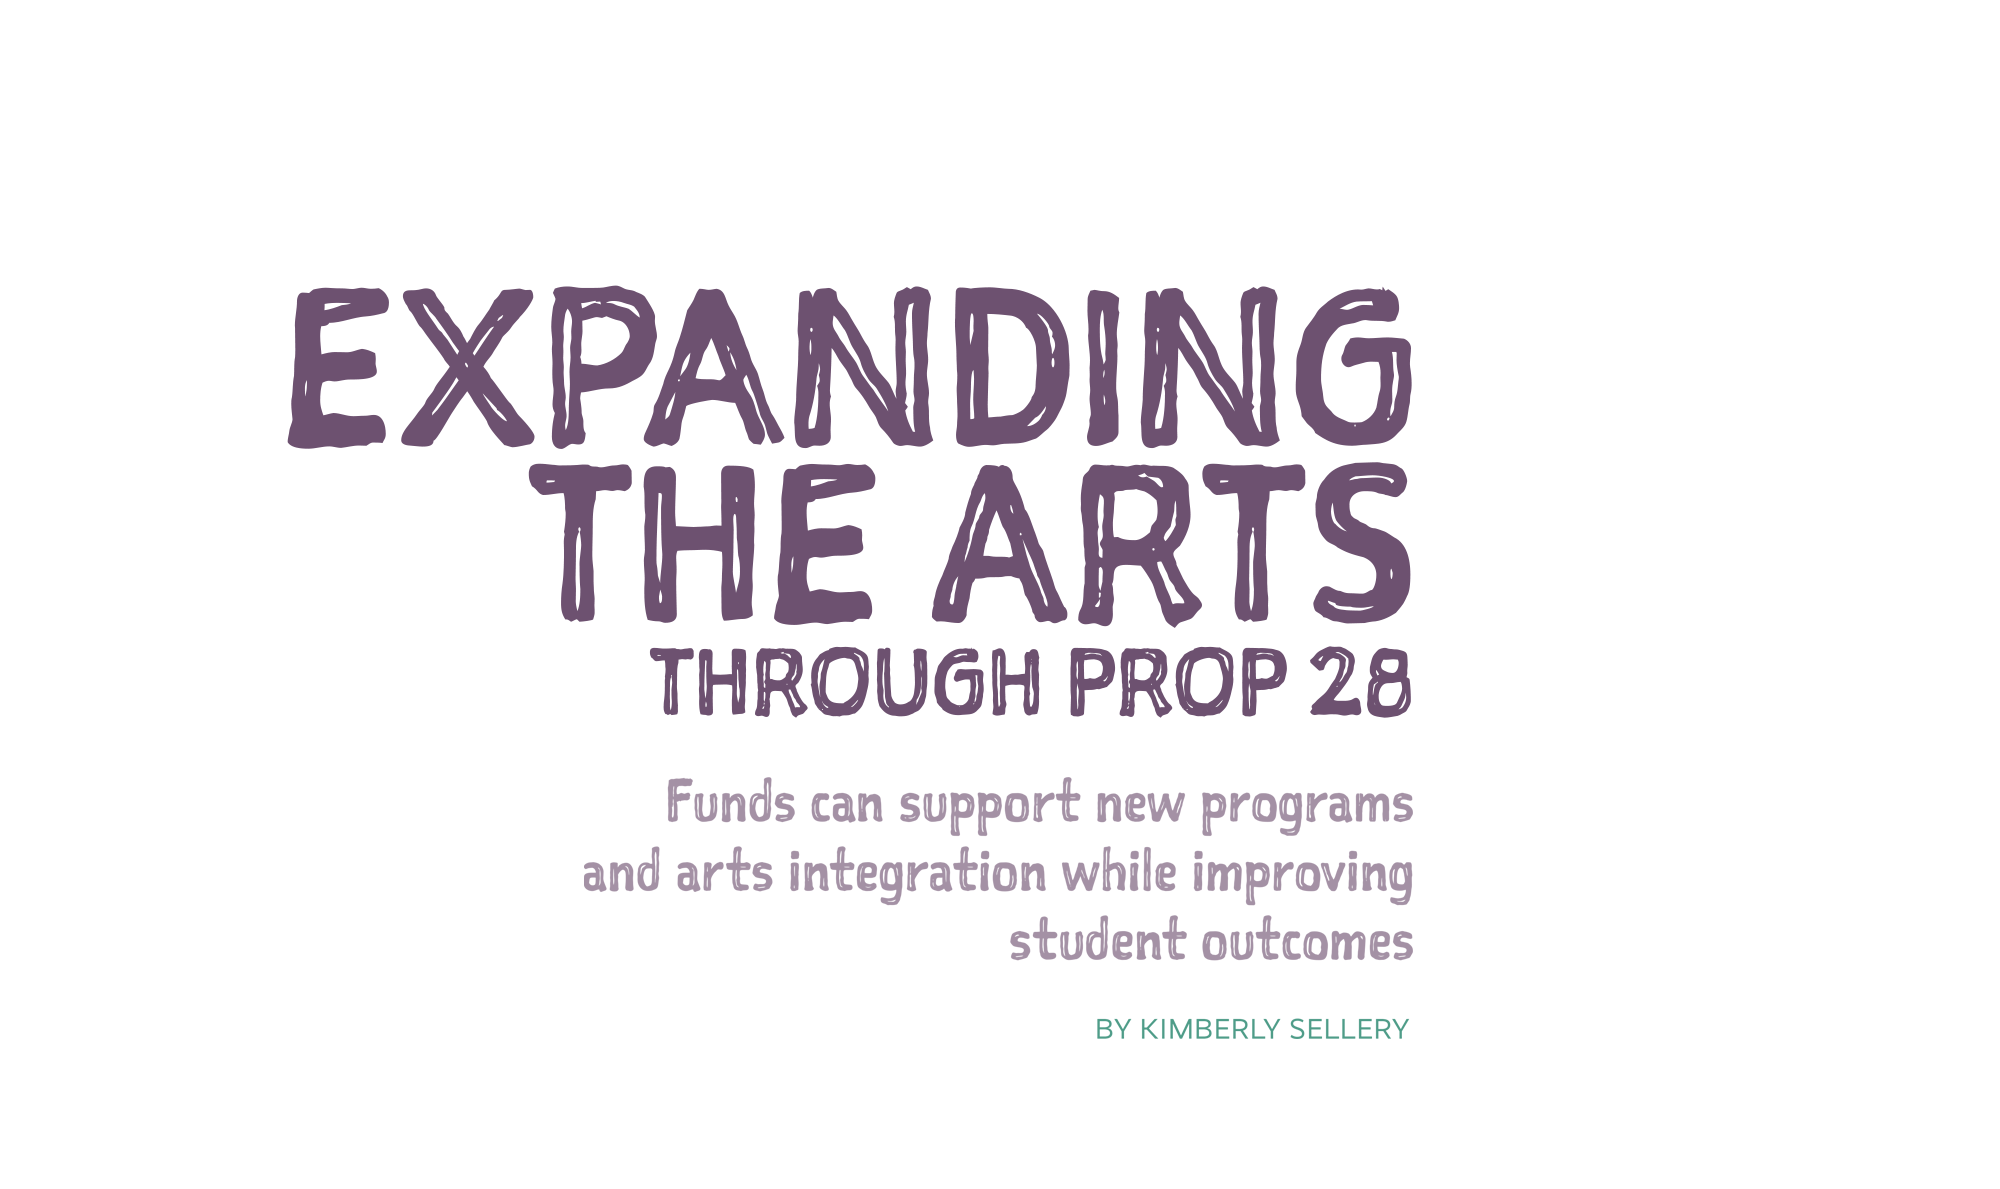 Expanding the arts through Prop 28: Funds can support new programs and arts integration while improving student outcomes by Kimberly Sellery